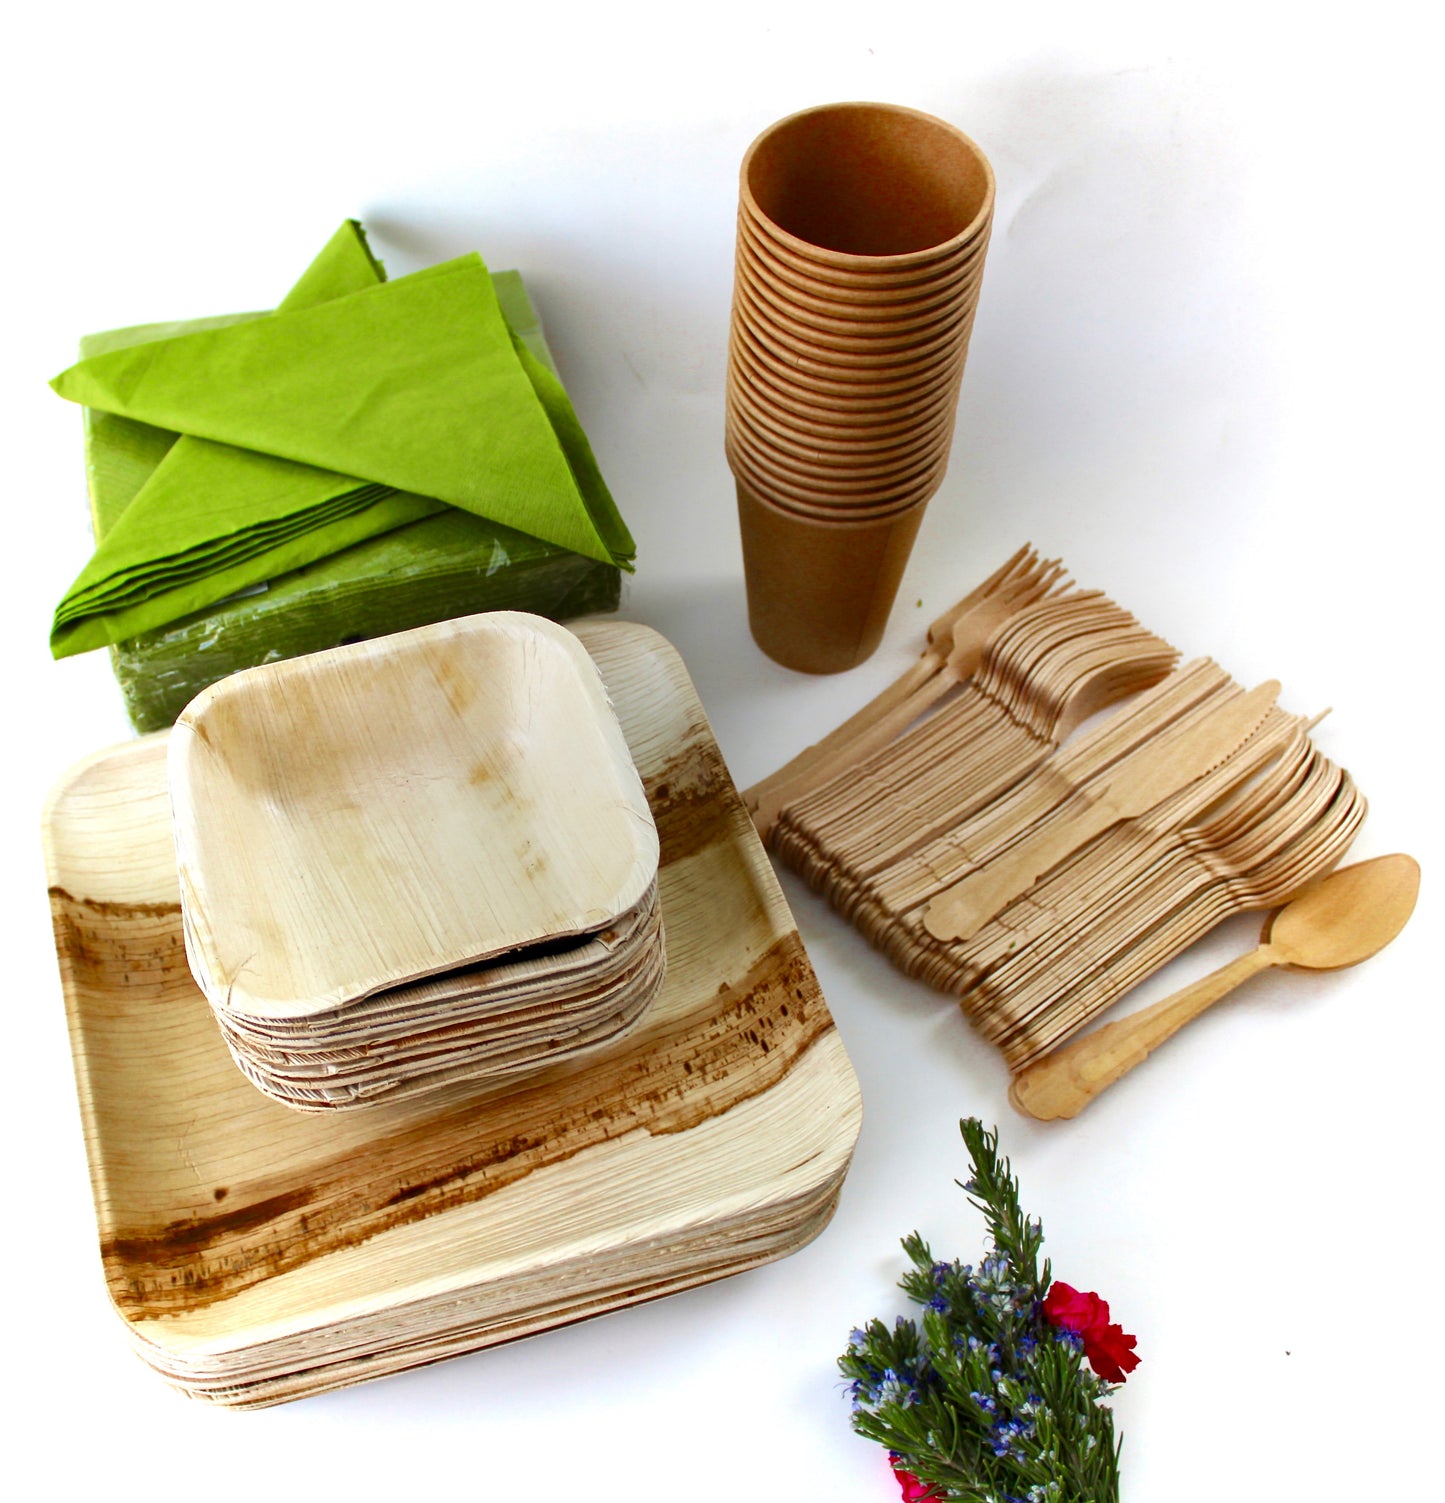 Copy of f Bamboo Type Palm Leaf 25 Pic 10"Square  - 25 pice  6"- Square - 25  pic  cup  - 75 pic Cutlery - 50 Pic Napkin